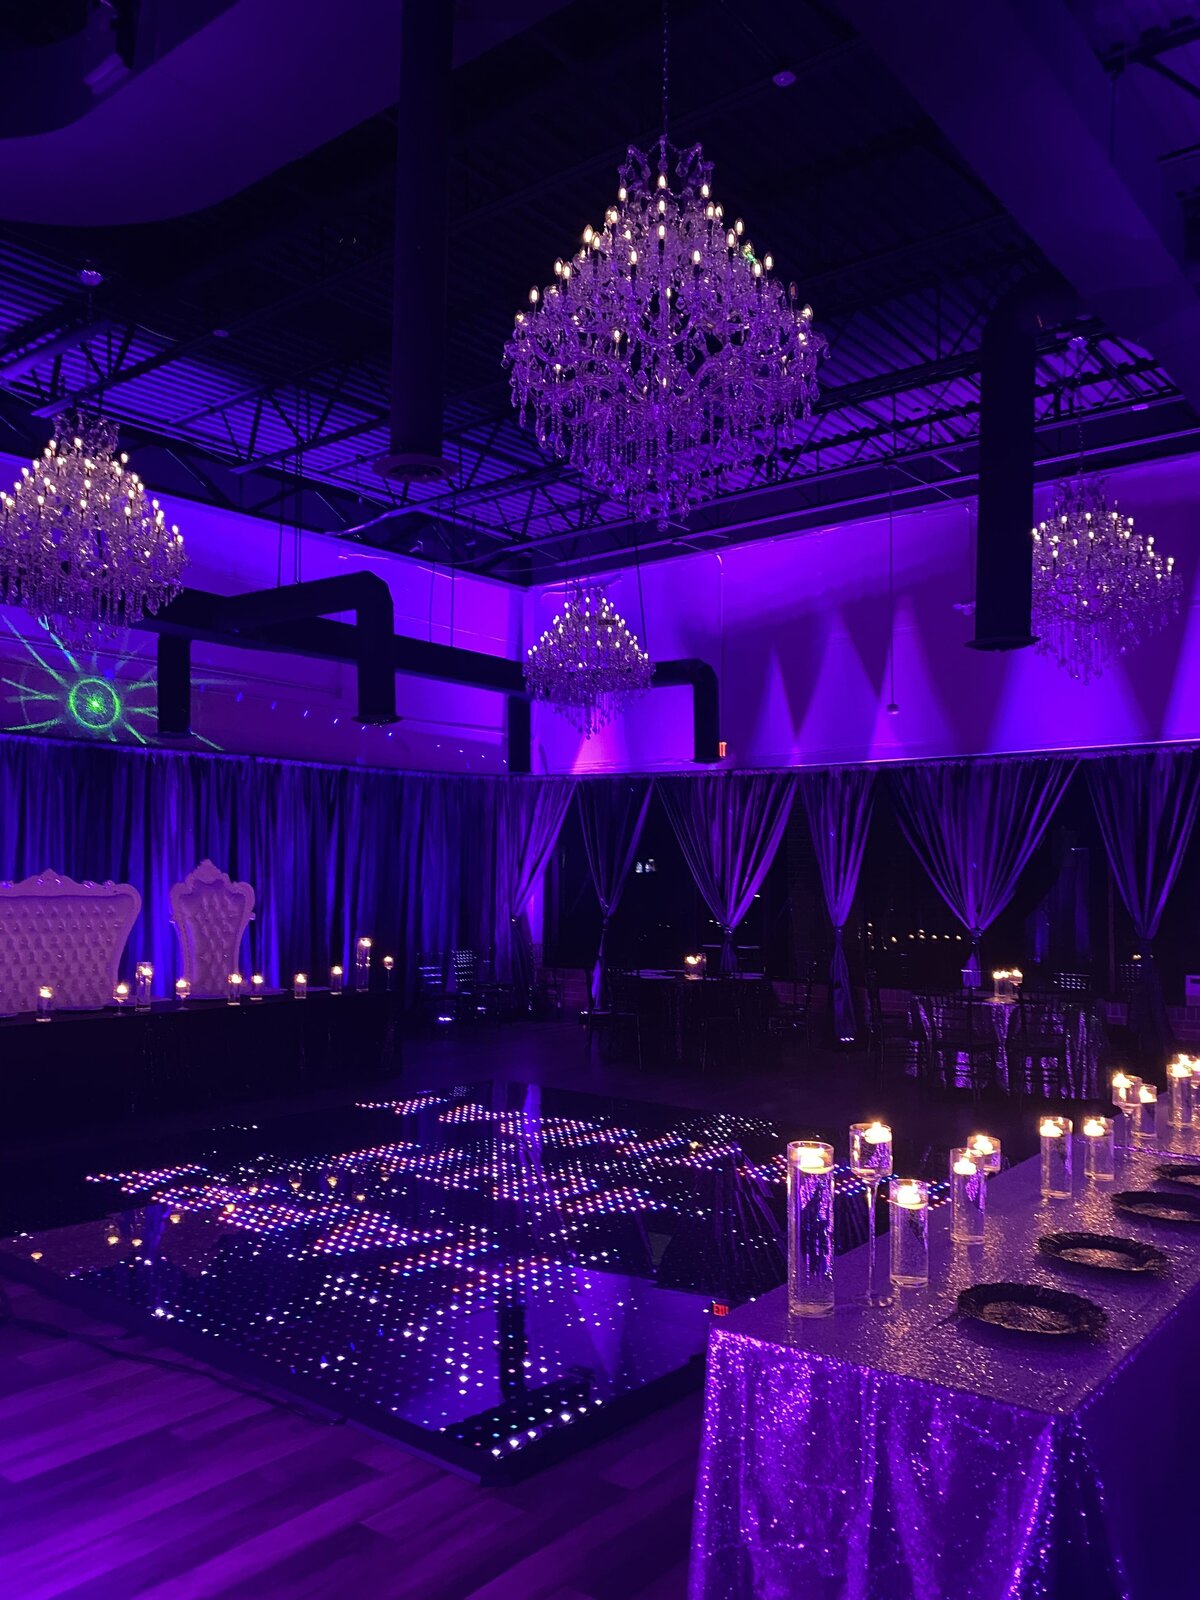 Eleven11 Event Studio is an event space venue within the Metro Detroit area. We are the one-stop shop for all your event rental needs.